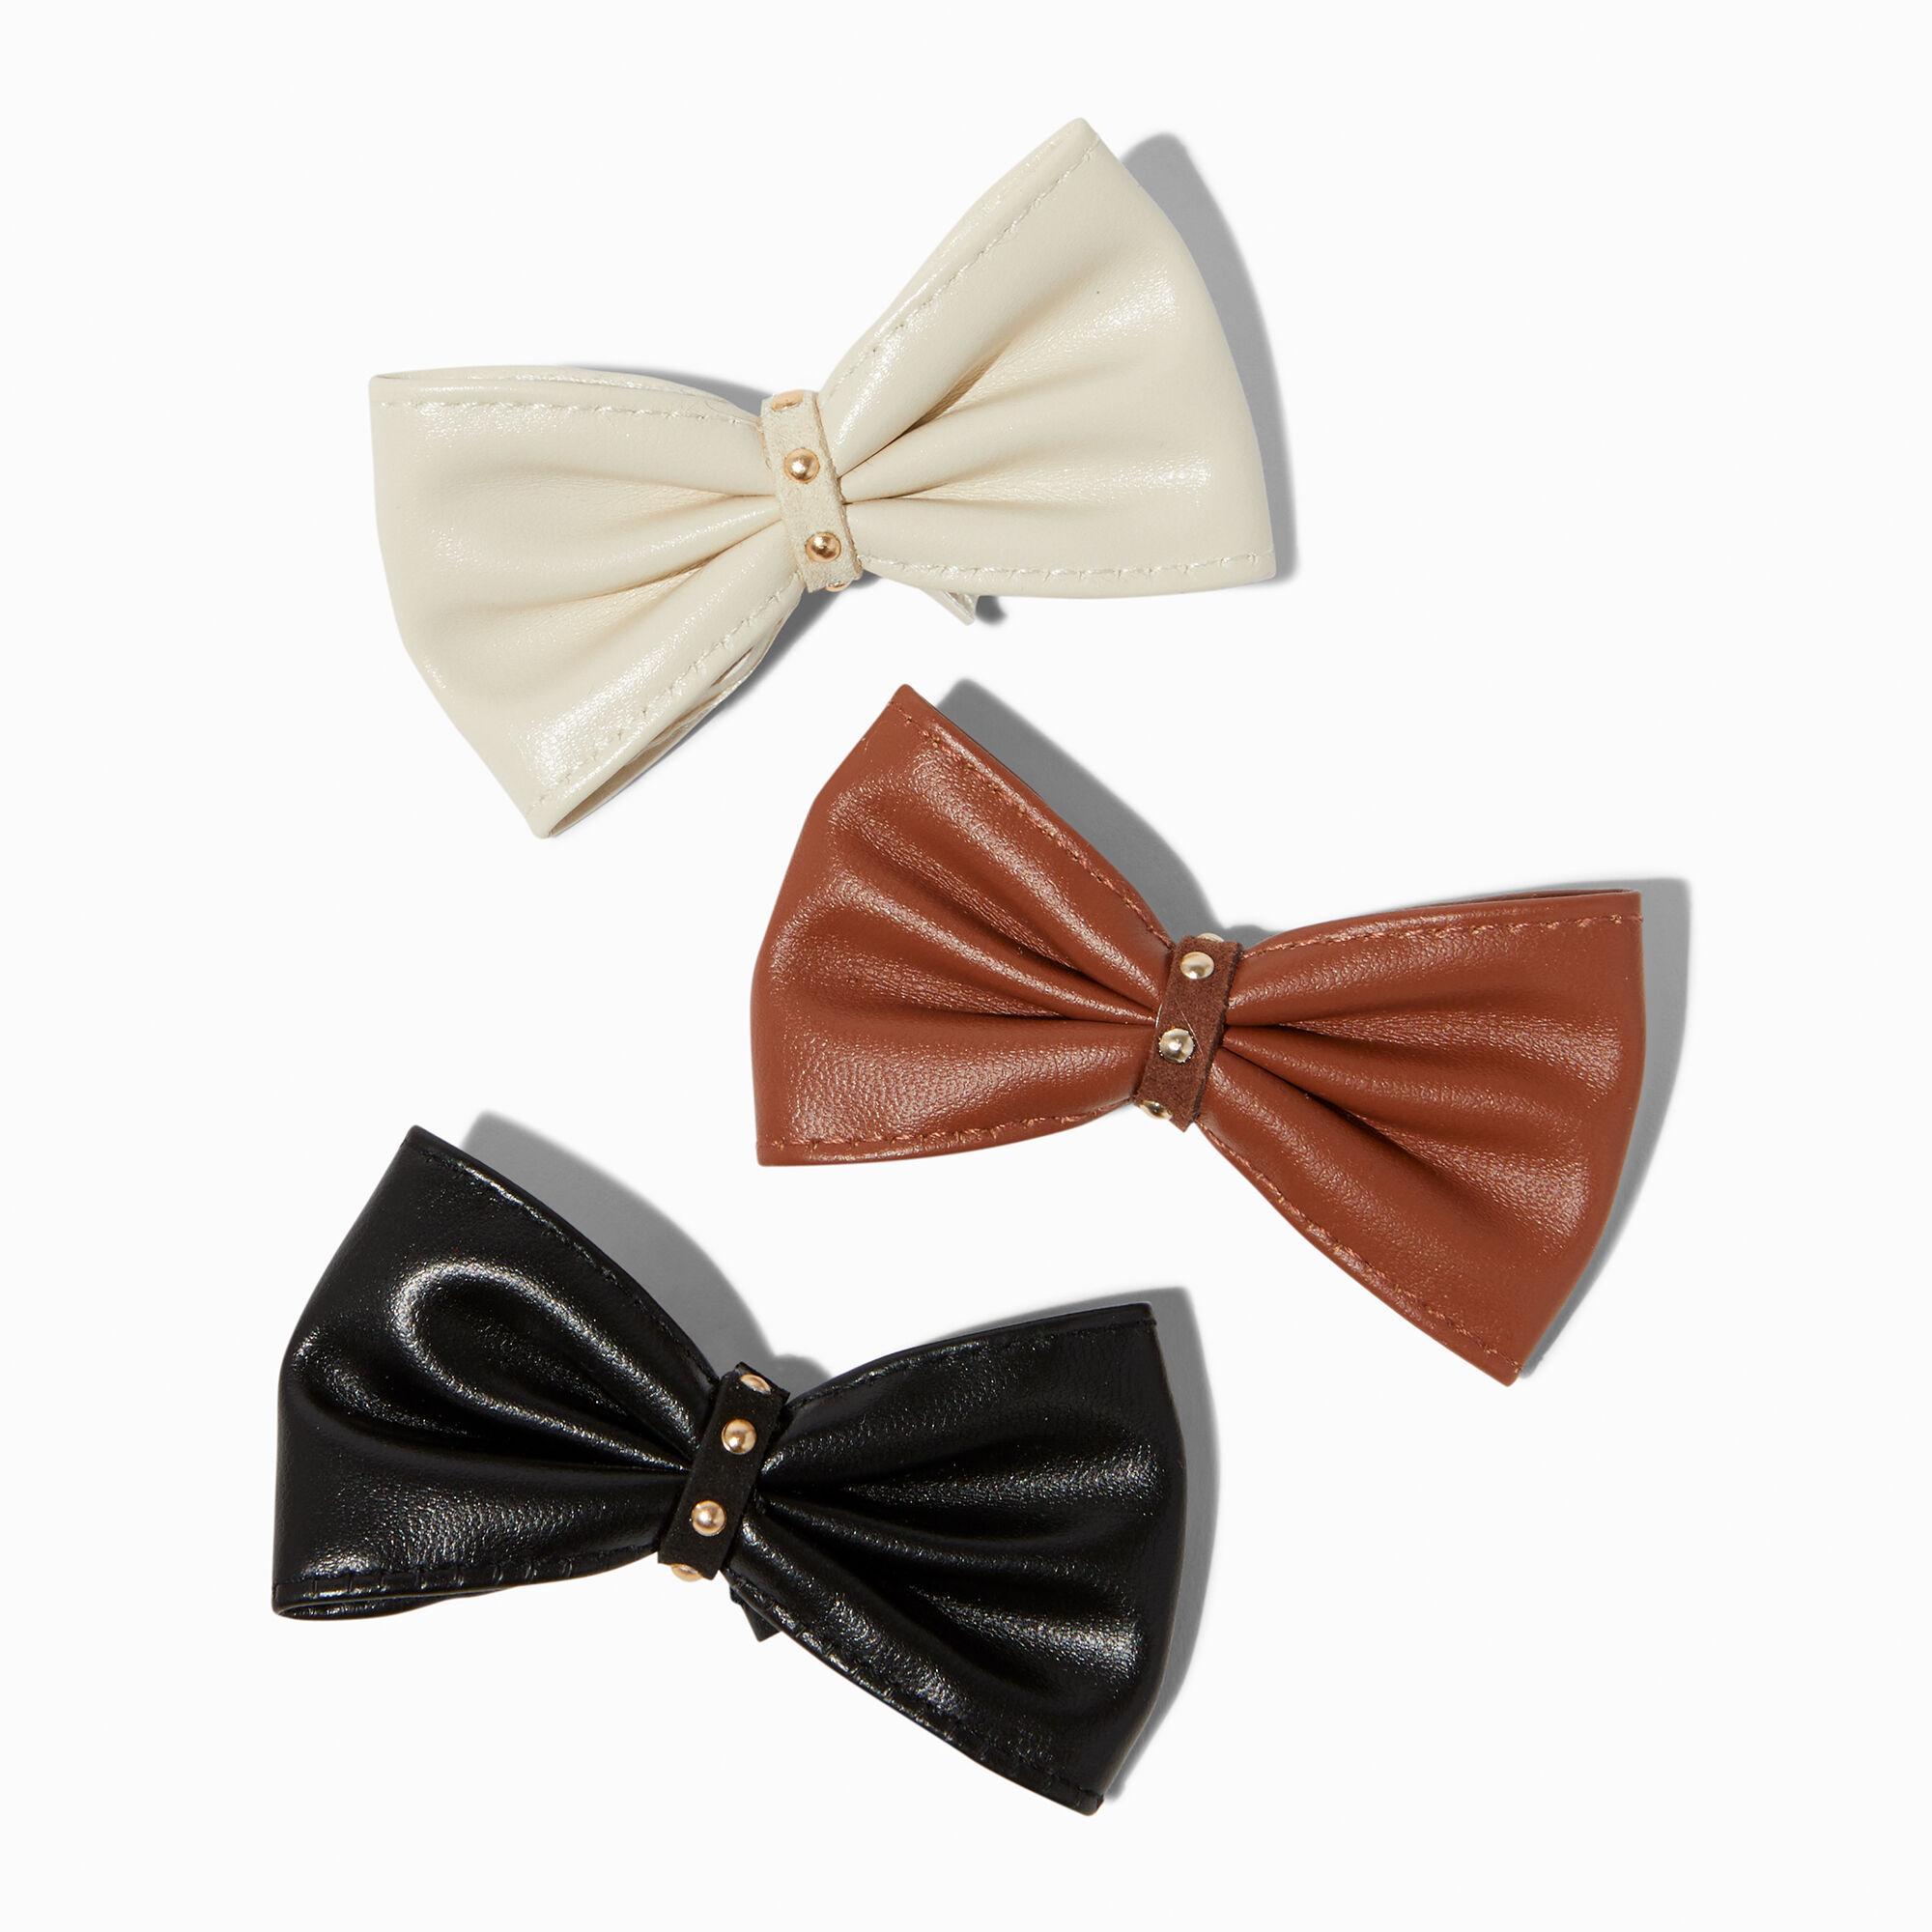 View Claires Studded Leather Bow Hair Clips 3 Pack Brown information